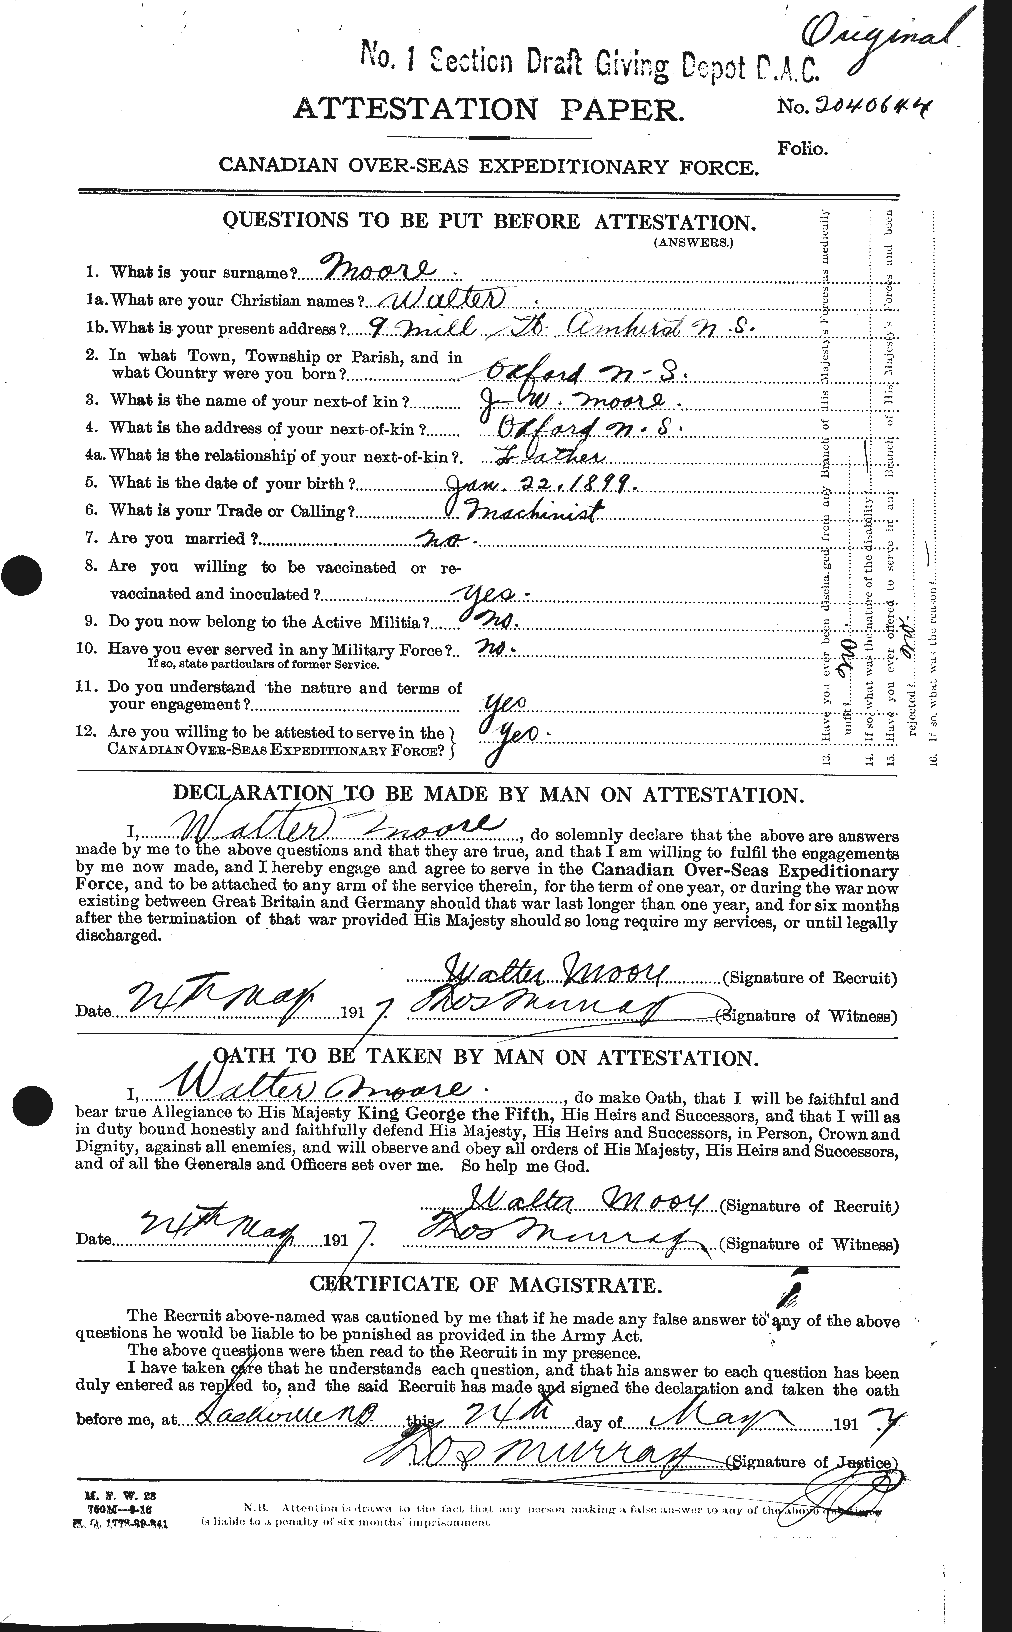 Personnel Records of the First World War - CEF 505693a